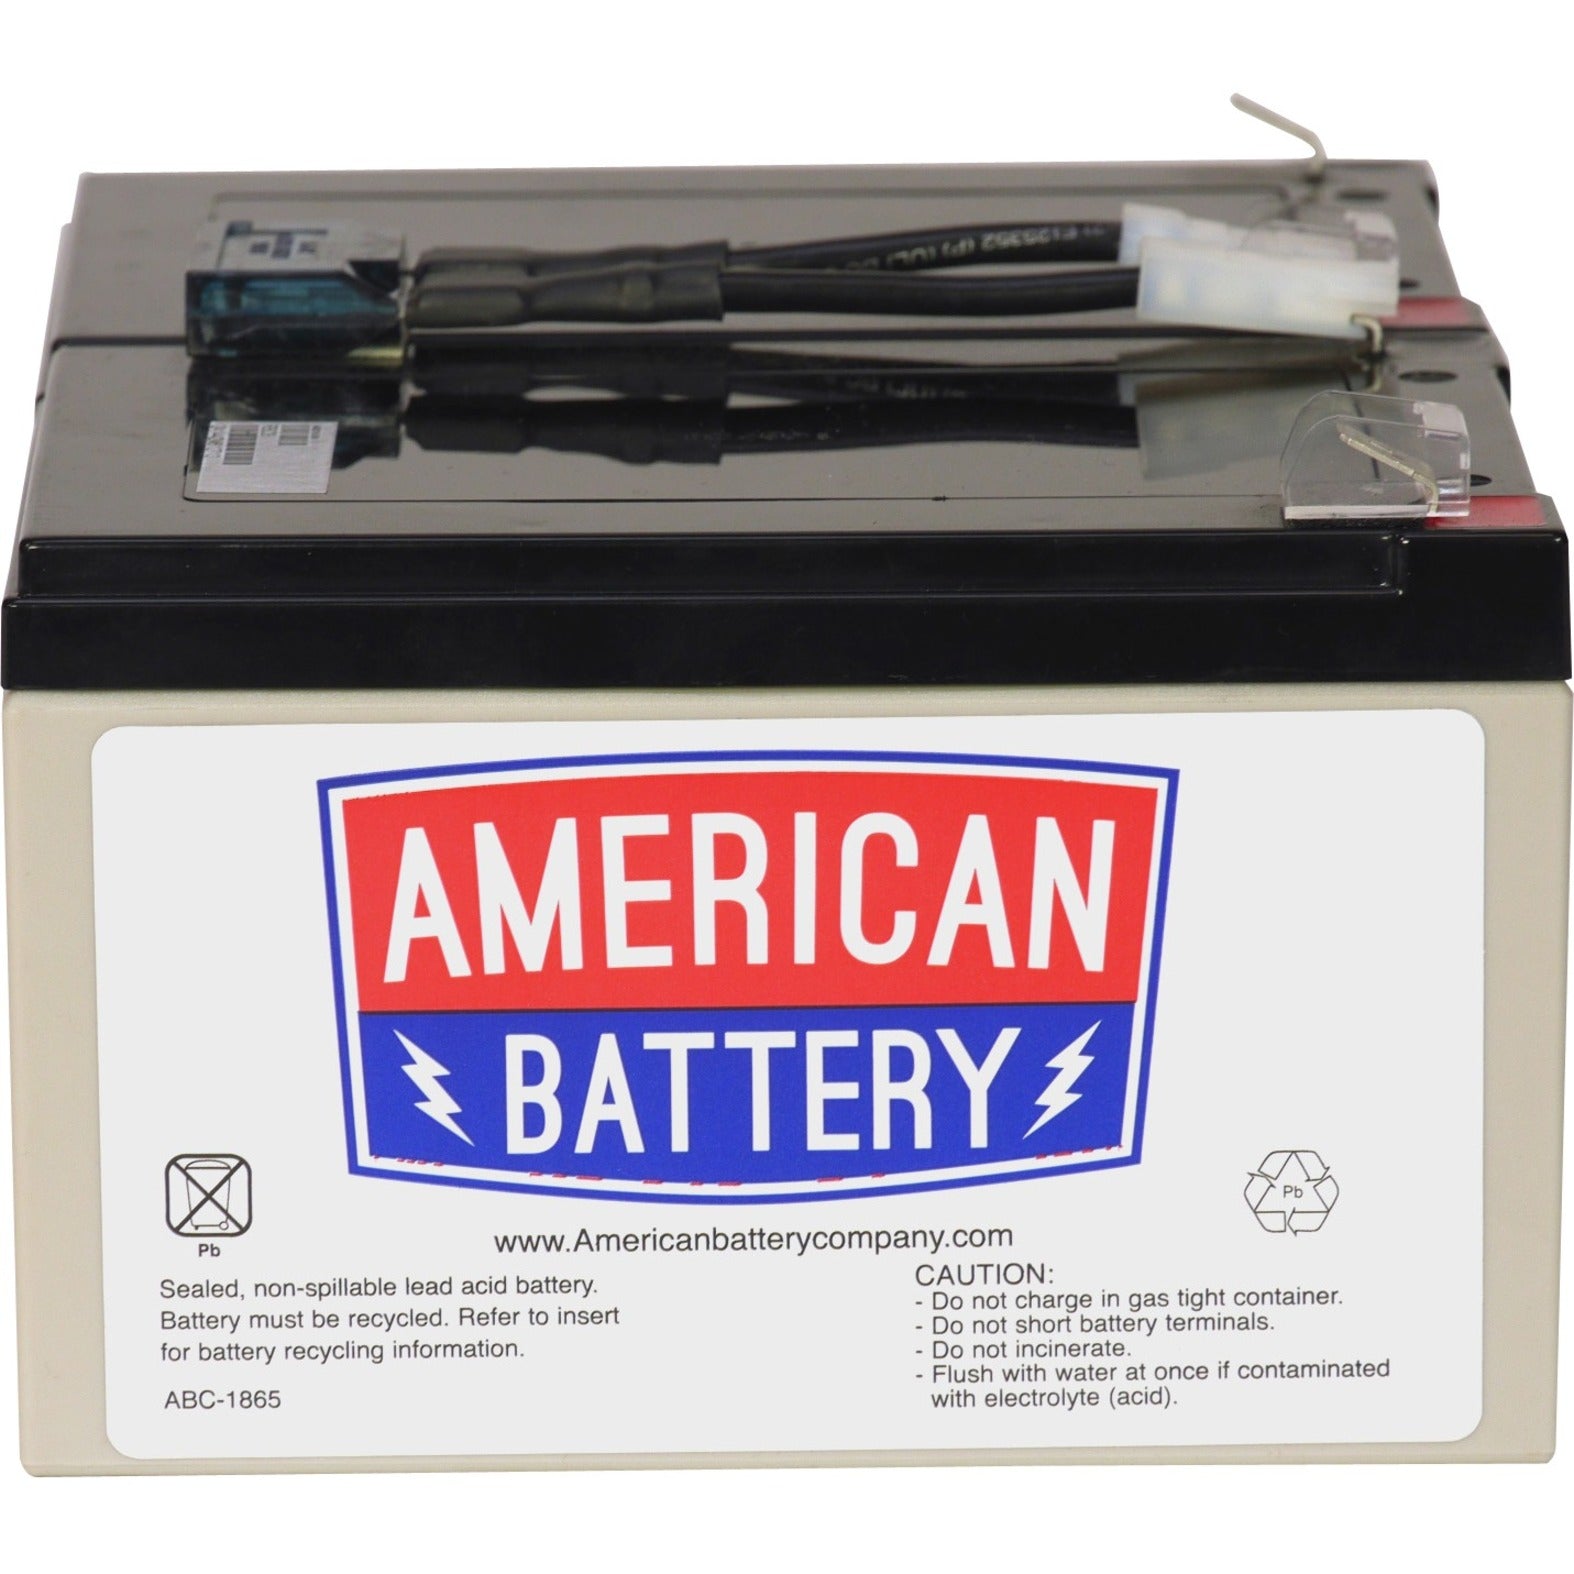 ABC RBC6 Replacement Battery Cartridge, 2 Year Warranty, Hot Swappable, 12V DC, 12000mAh